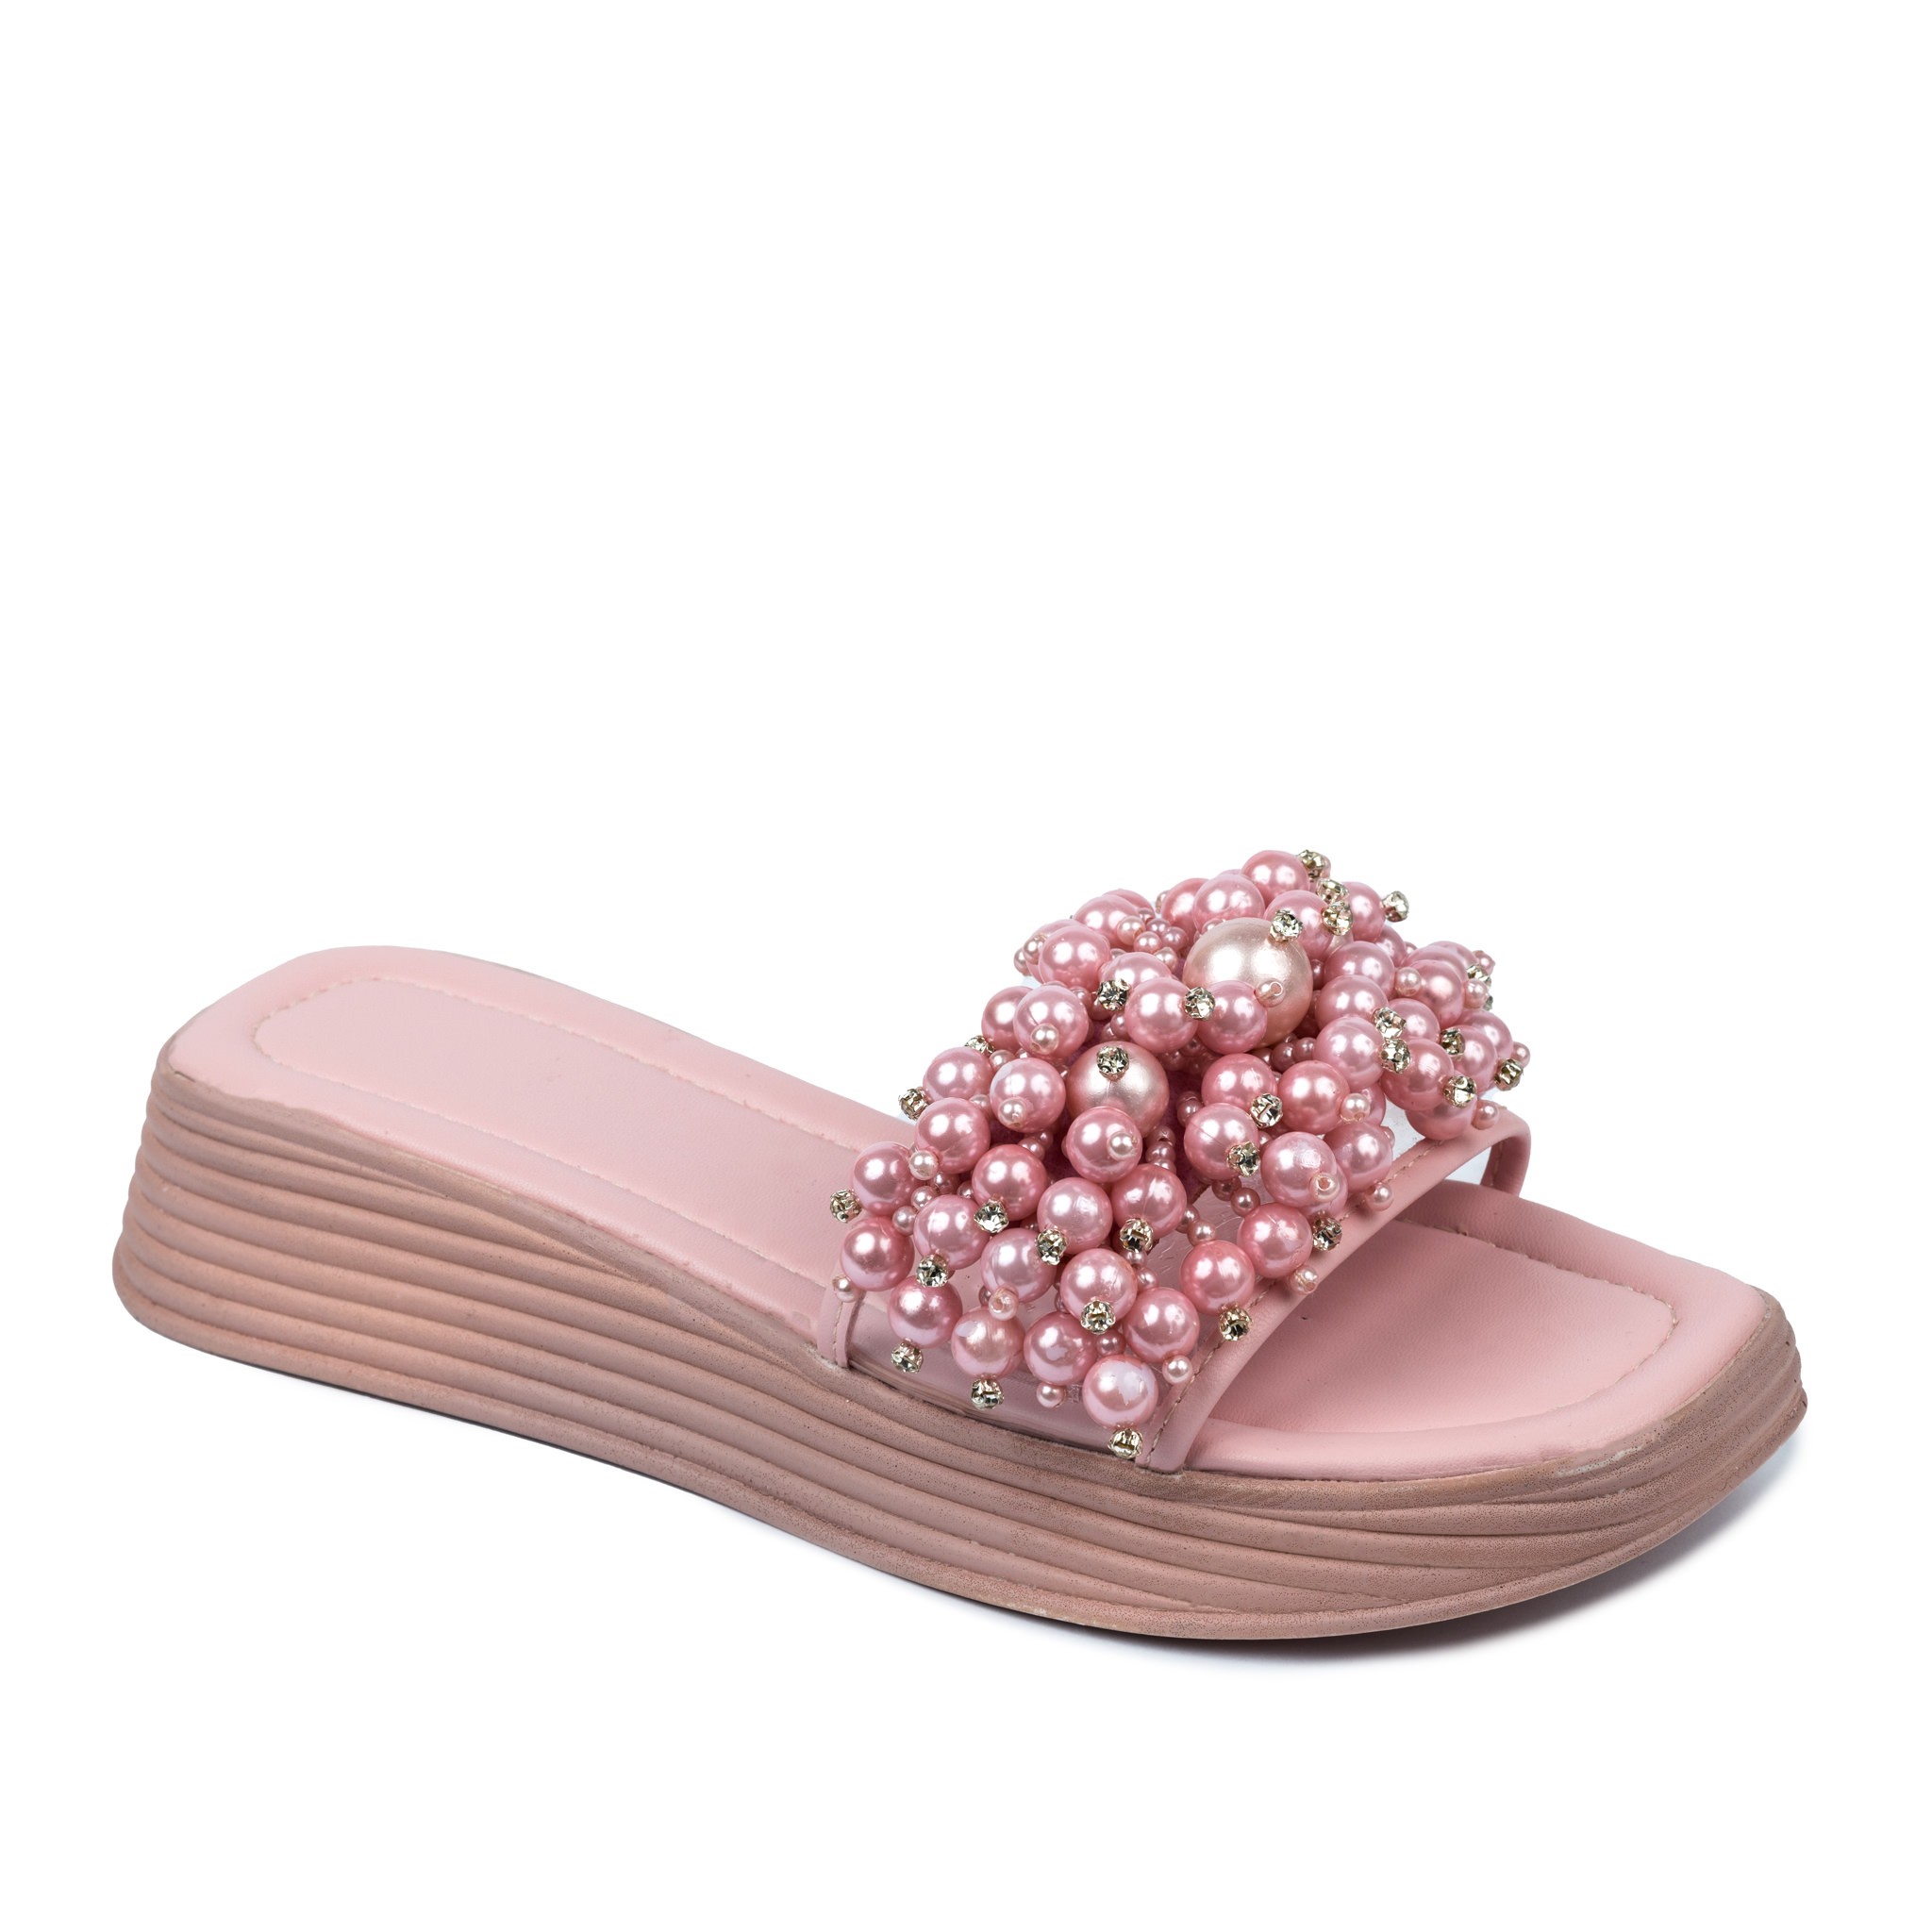 Women Slippers and Mules A554 - ROSE